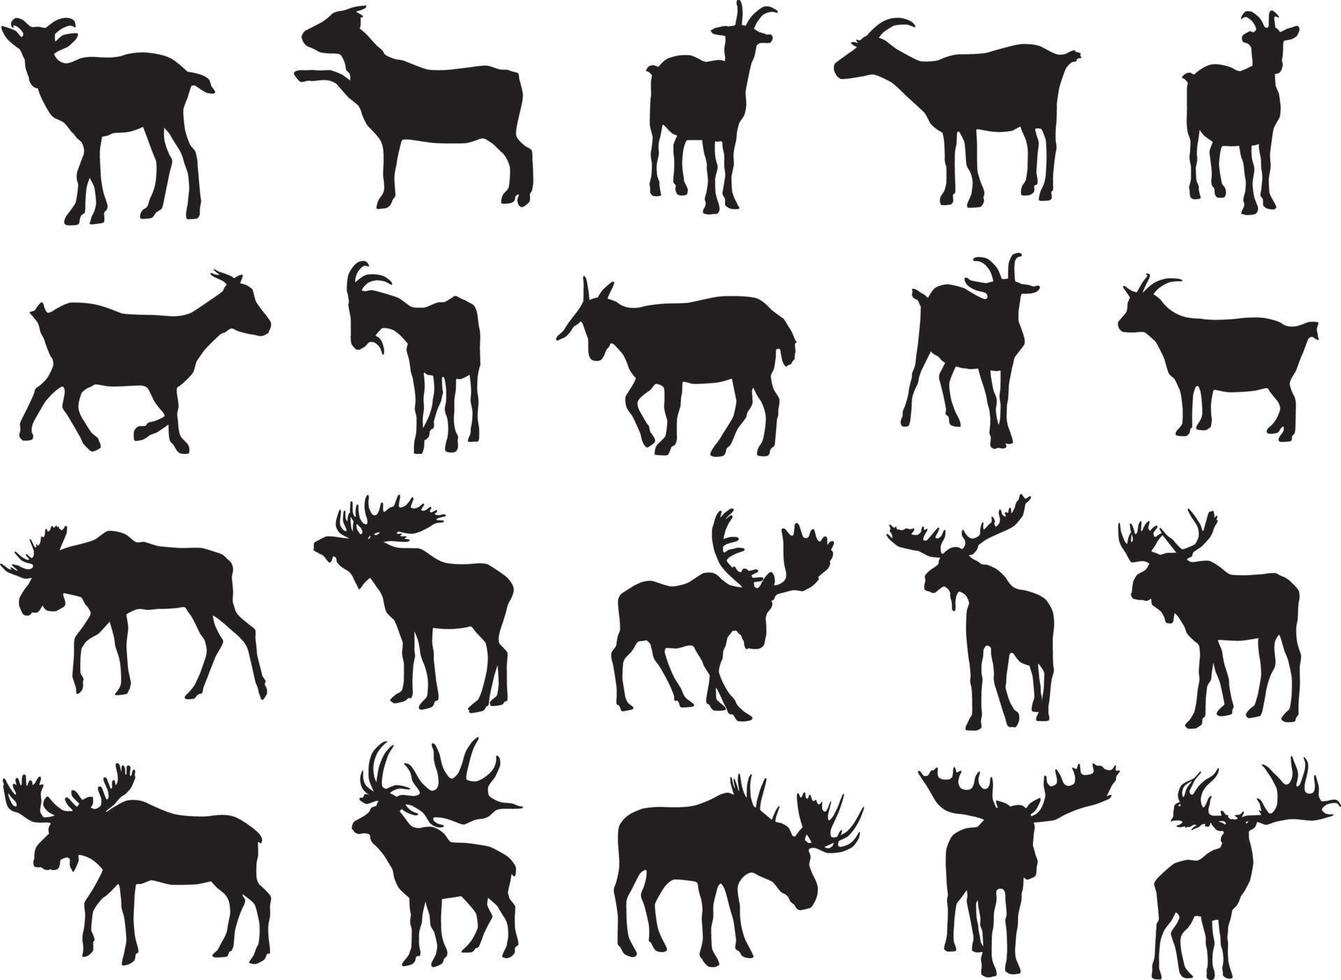 Moose and goat silhouette vector